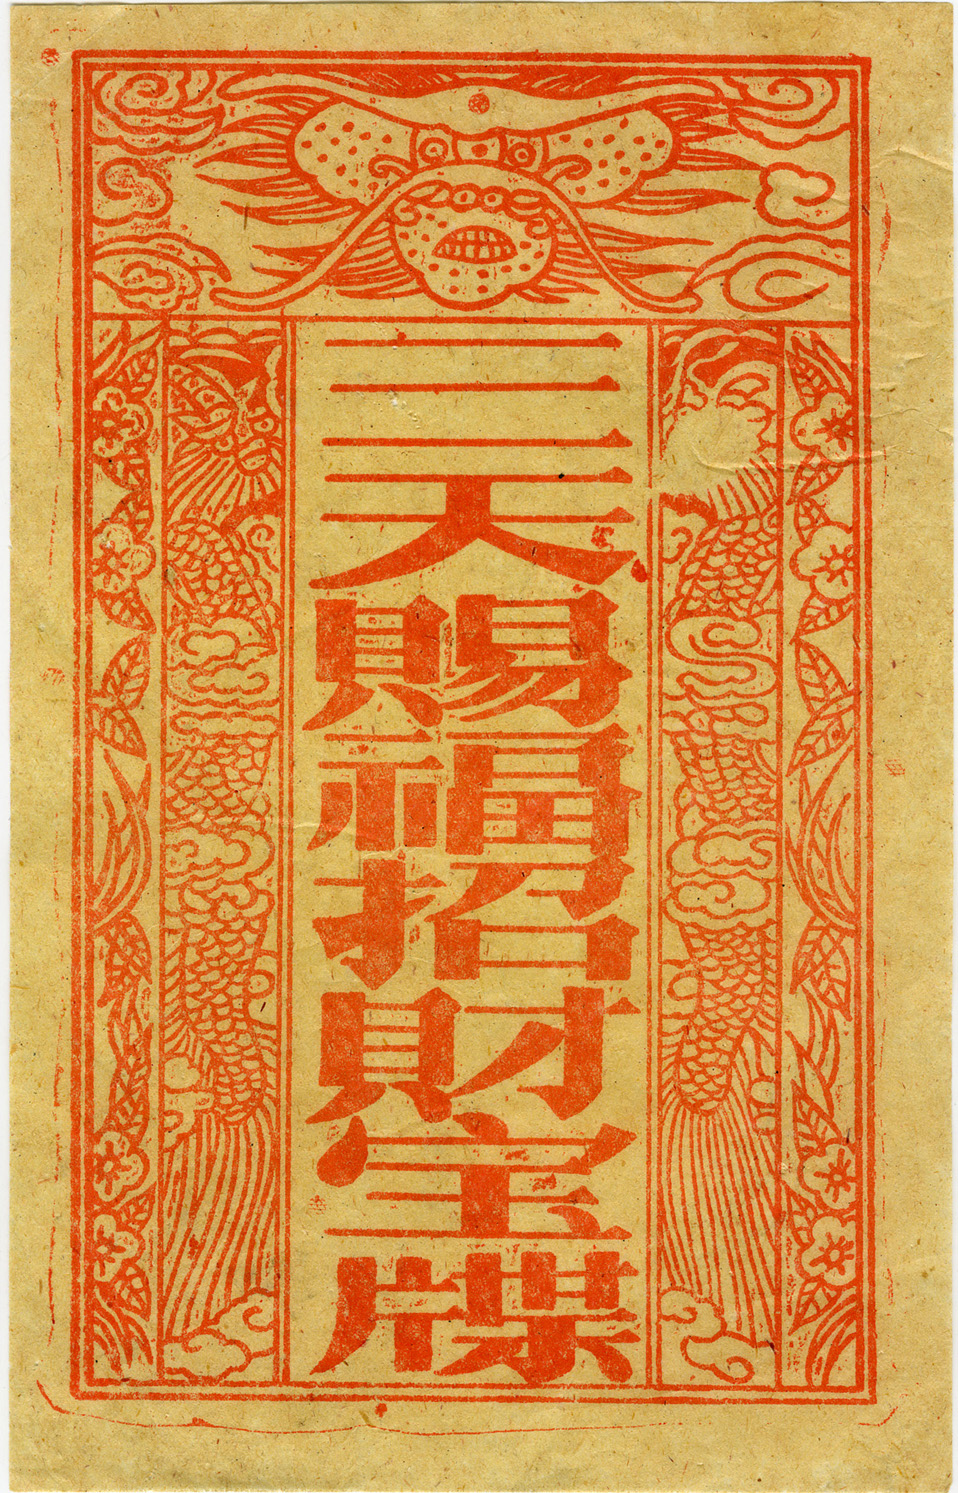 Depiction of Chinese funeral money